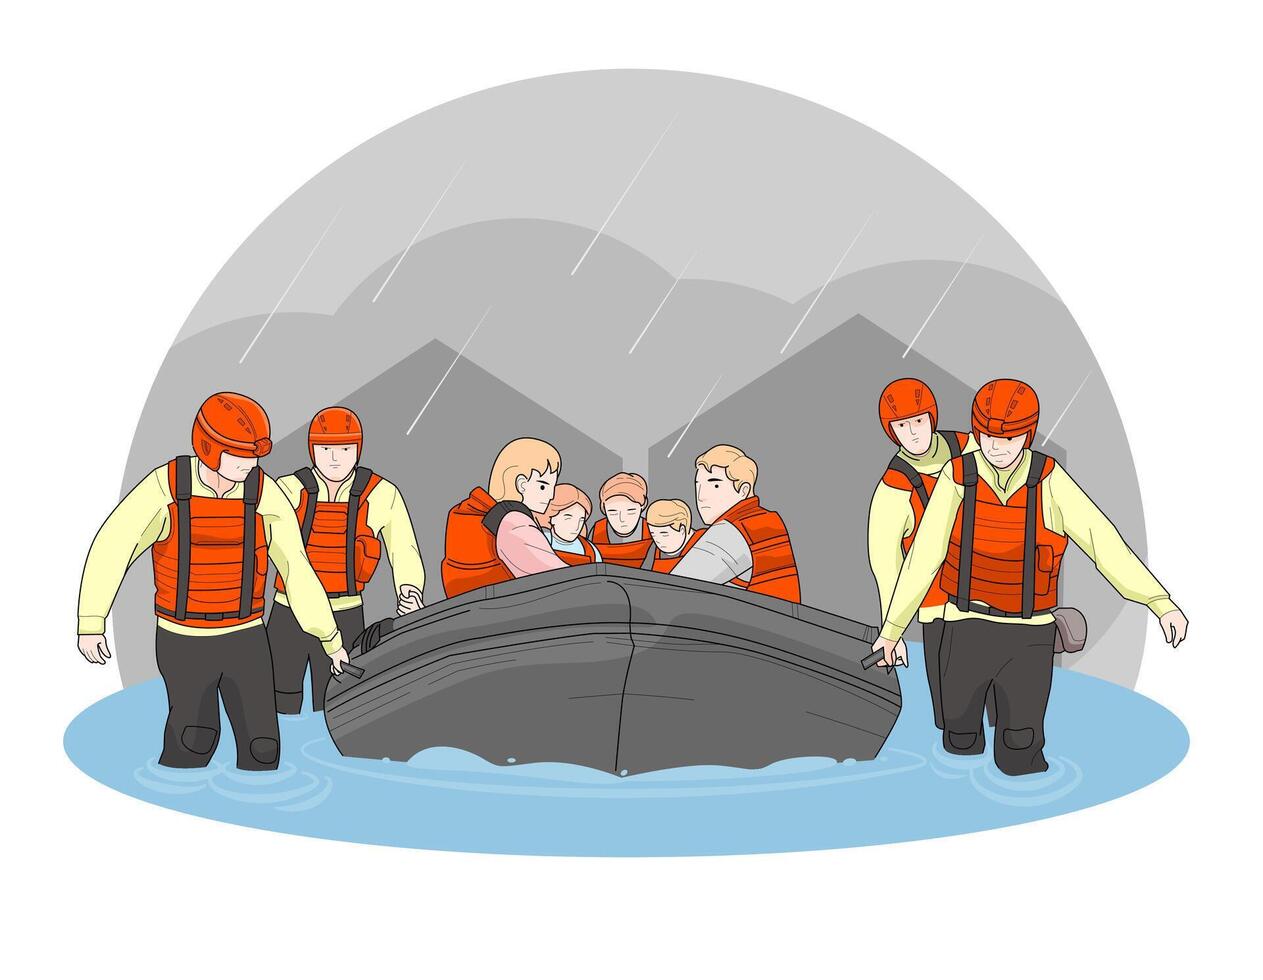 Rescued Flood Survivors Sitting in Inflatable Boat Flat Cartoon Vector Illustration. People Saved from Flooded Buildings. Natural Disaster. Water Covering Land and Houses. Family in Life Vest